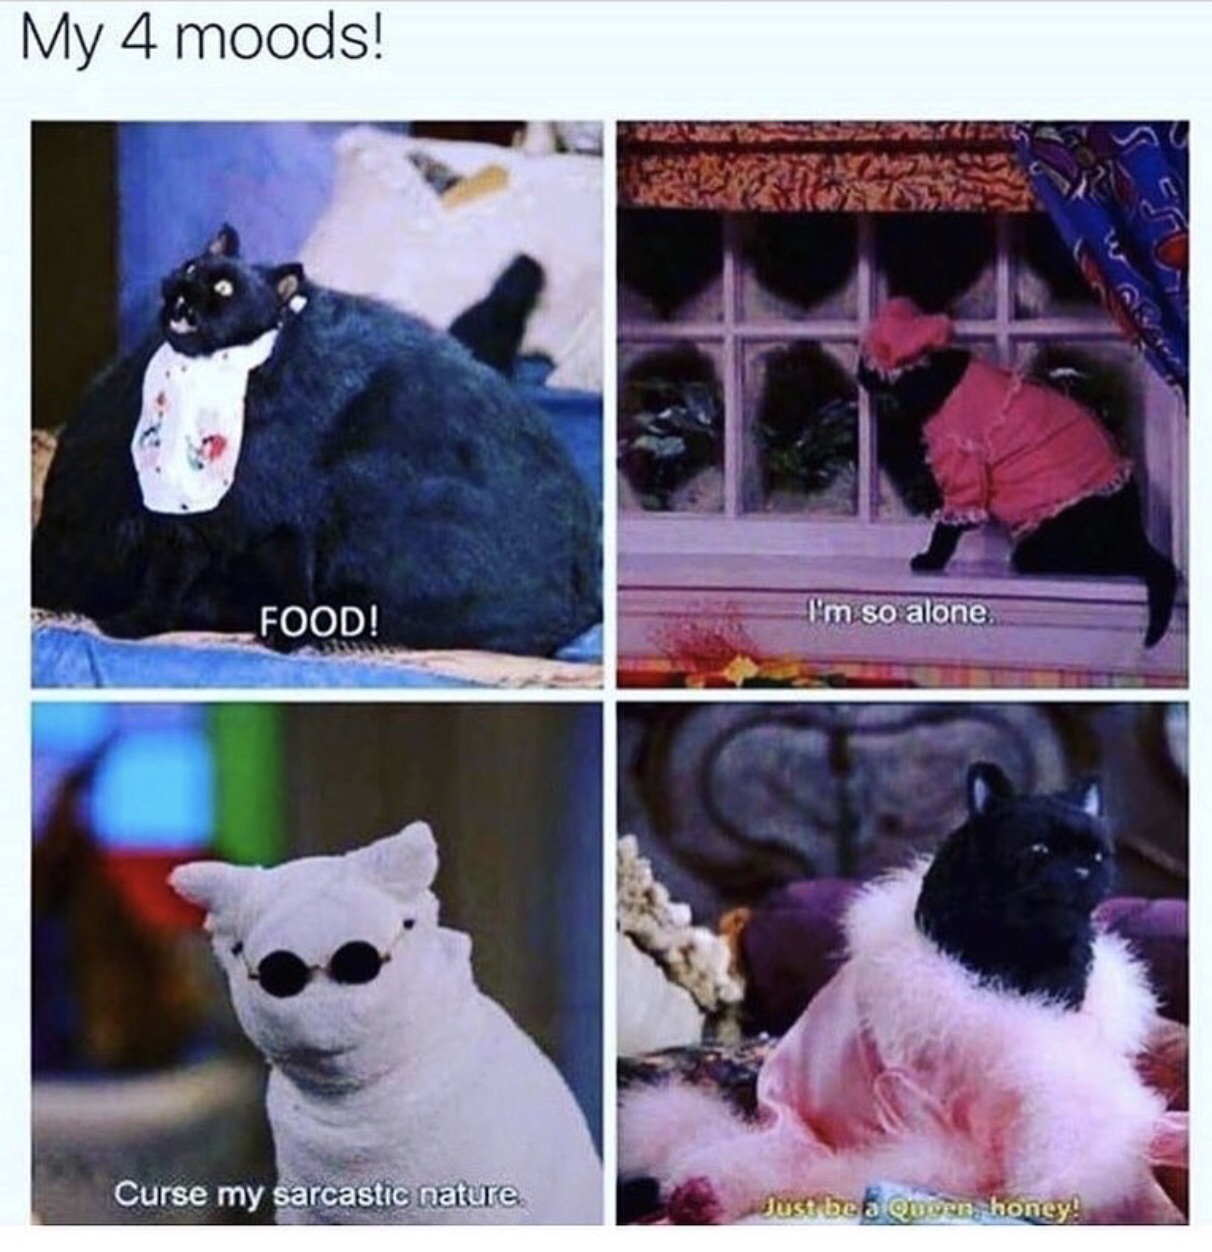 salem my four moods - My 4 moods! Food! I'm so alone. Curse my sarcastic nature Just be bou van, honey!